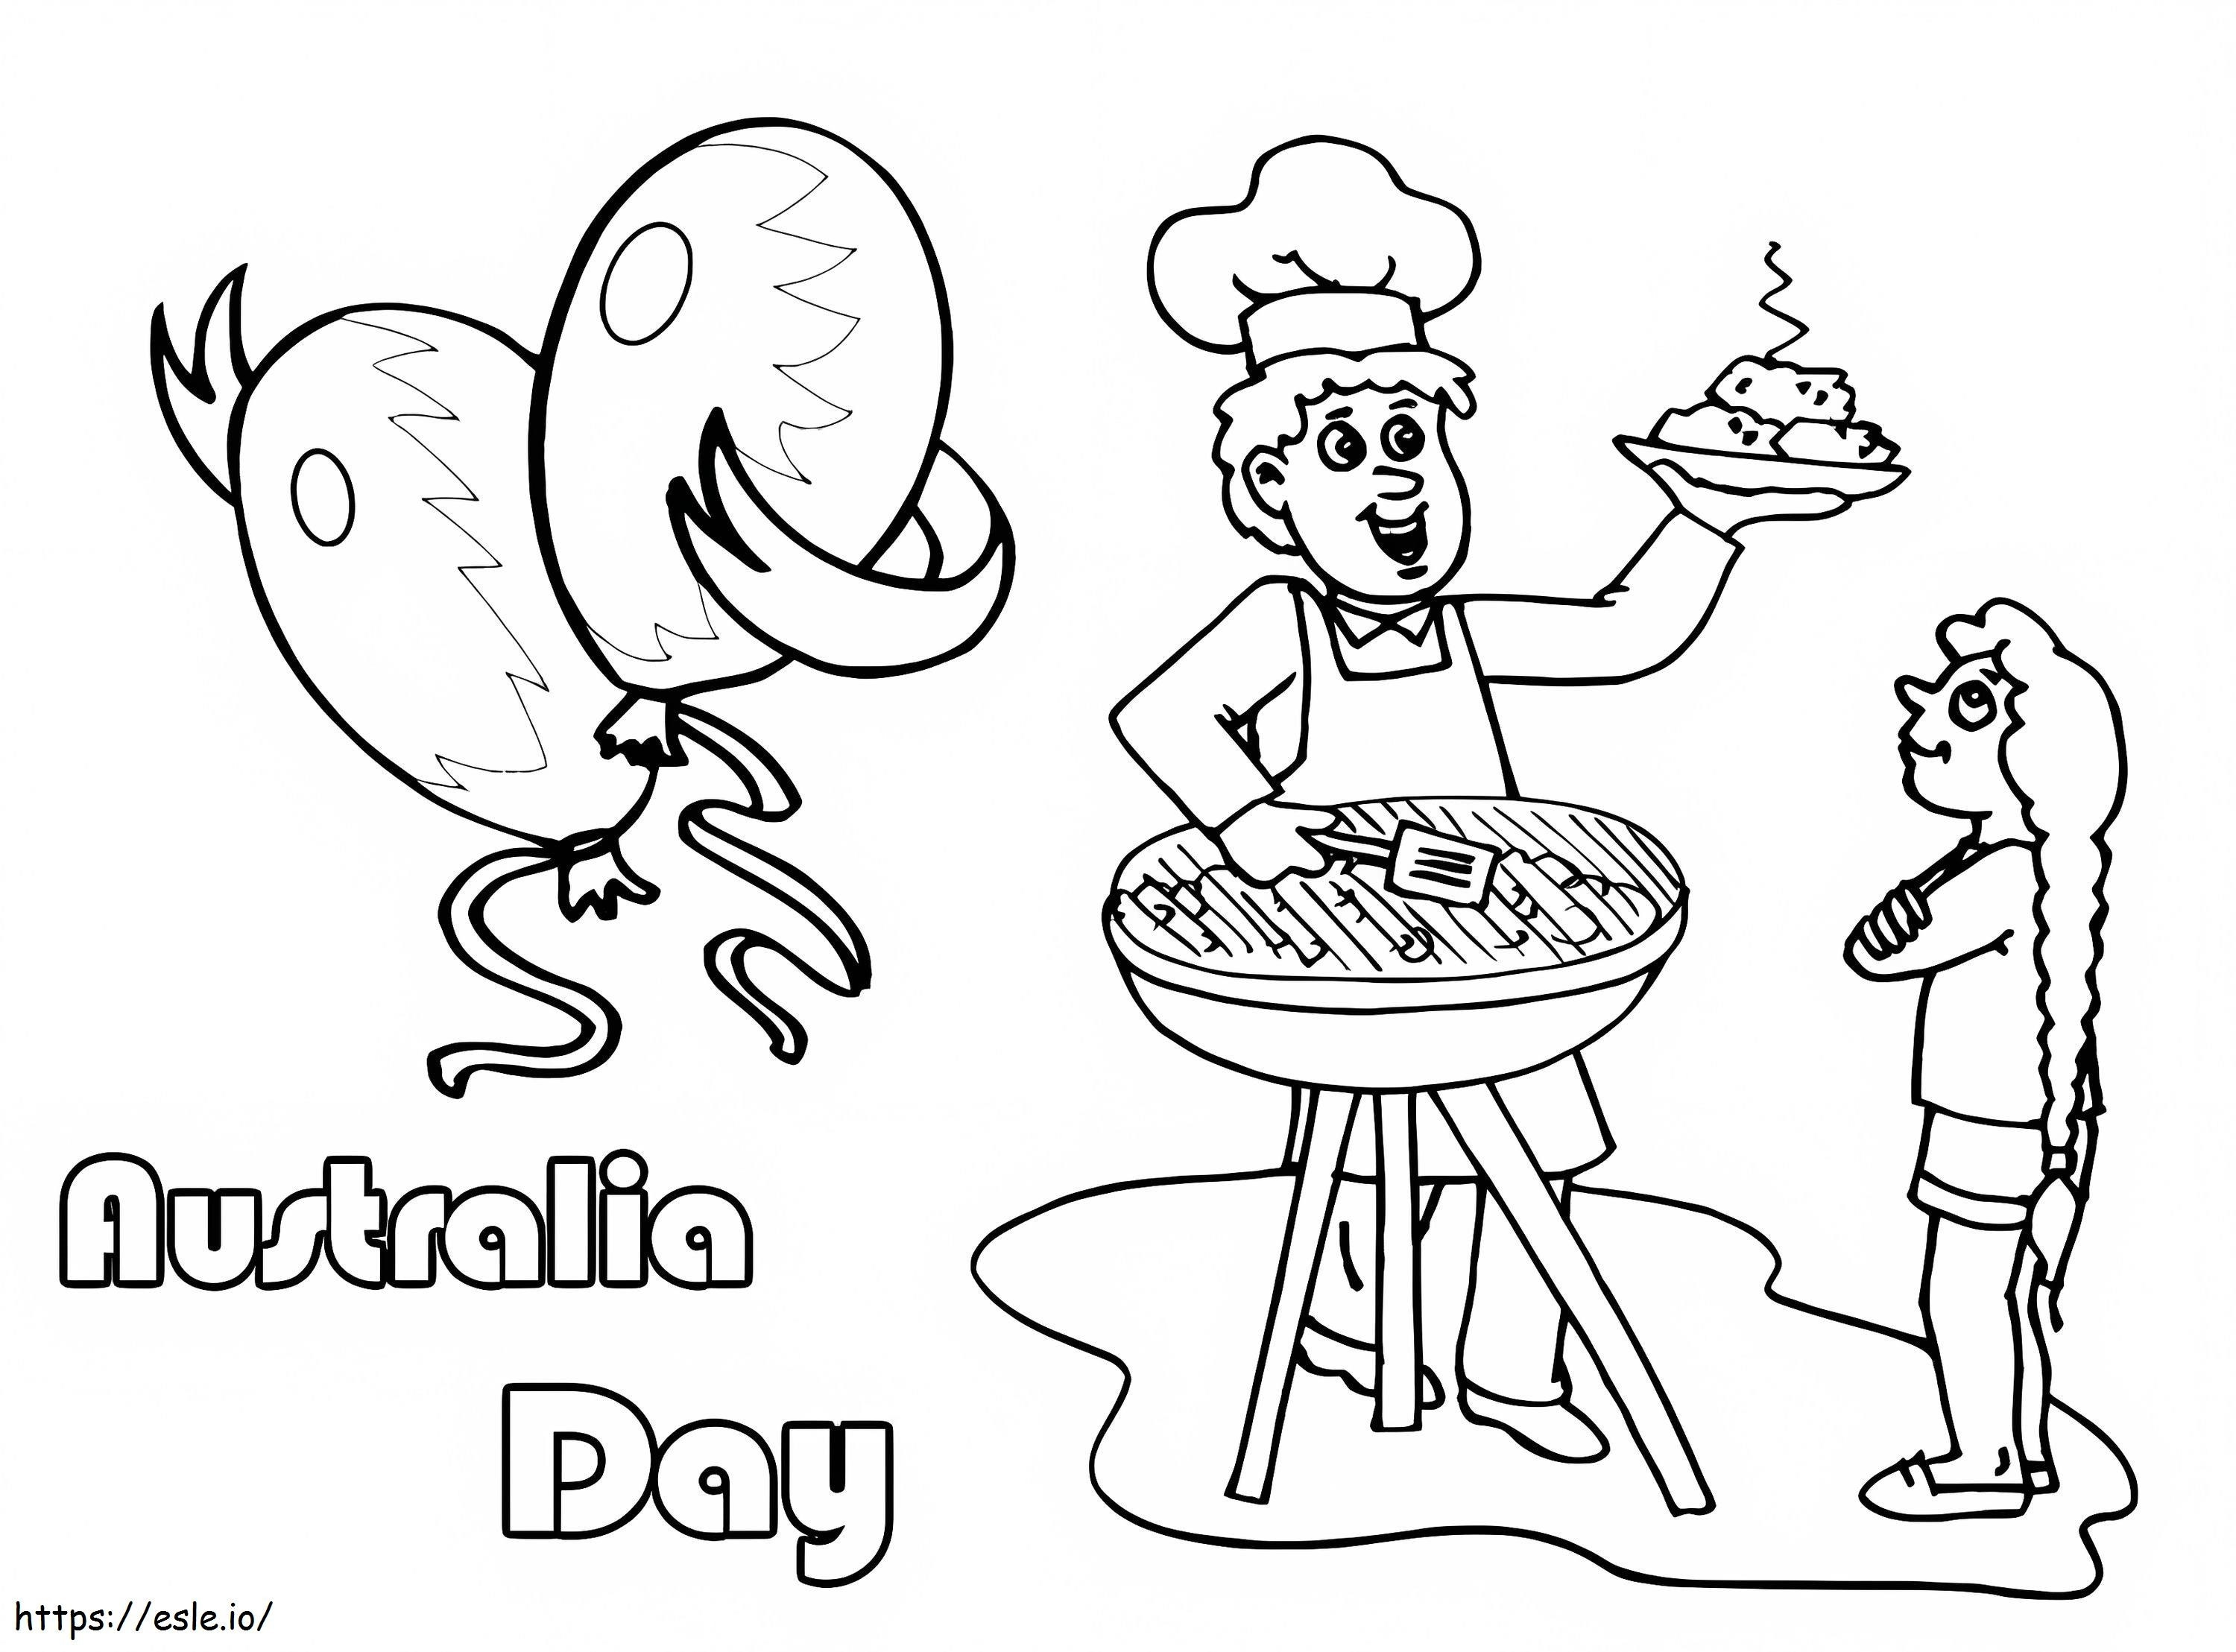 Happy Australia Day coloring page